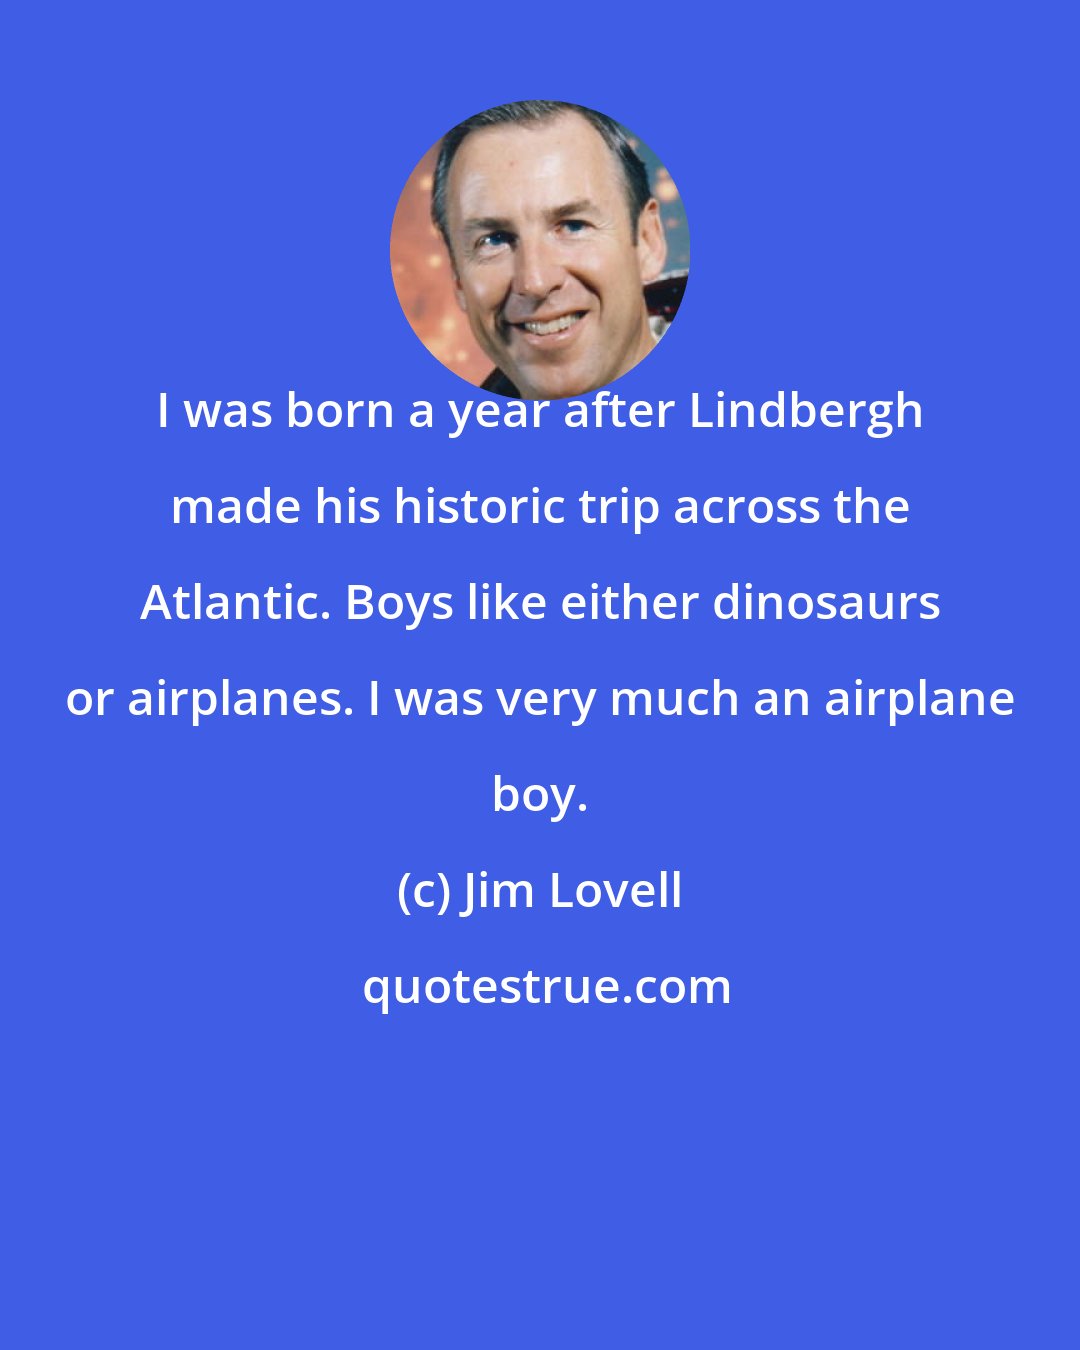 Jim Lovell: I was born a year after Lindbergh made his historic trip across the Atlantic. Boys like either dinosaurs or airplanes. I was very much an airplane boy.